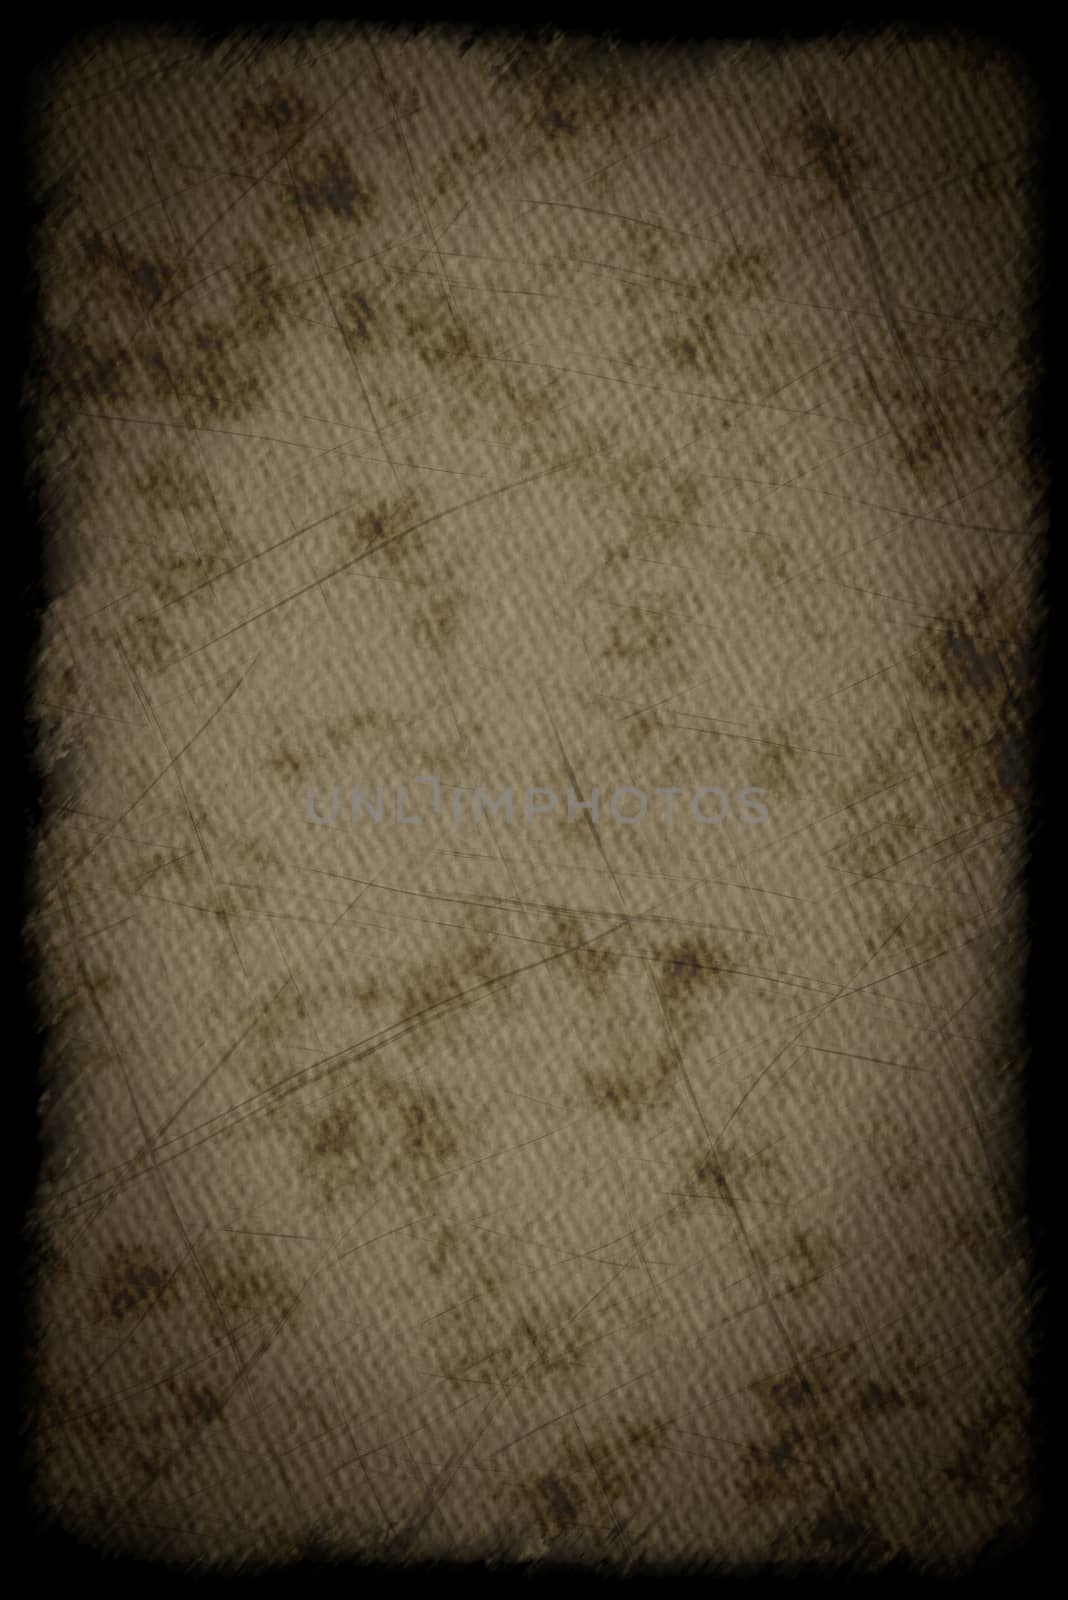 Old paper texture or background by Attila